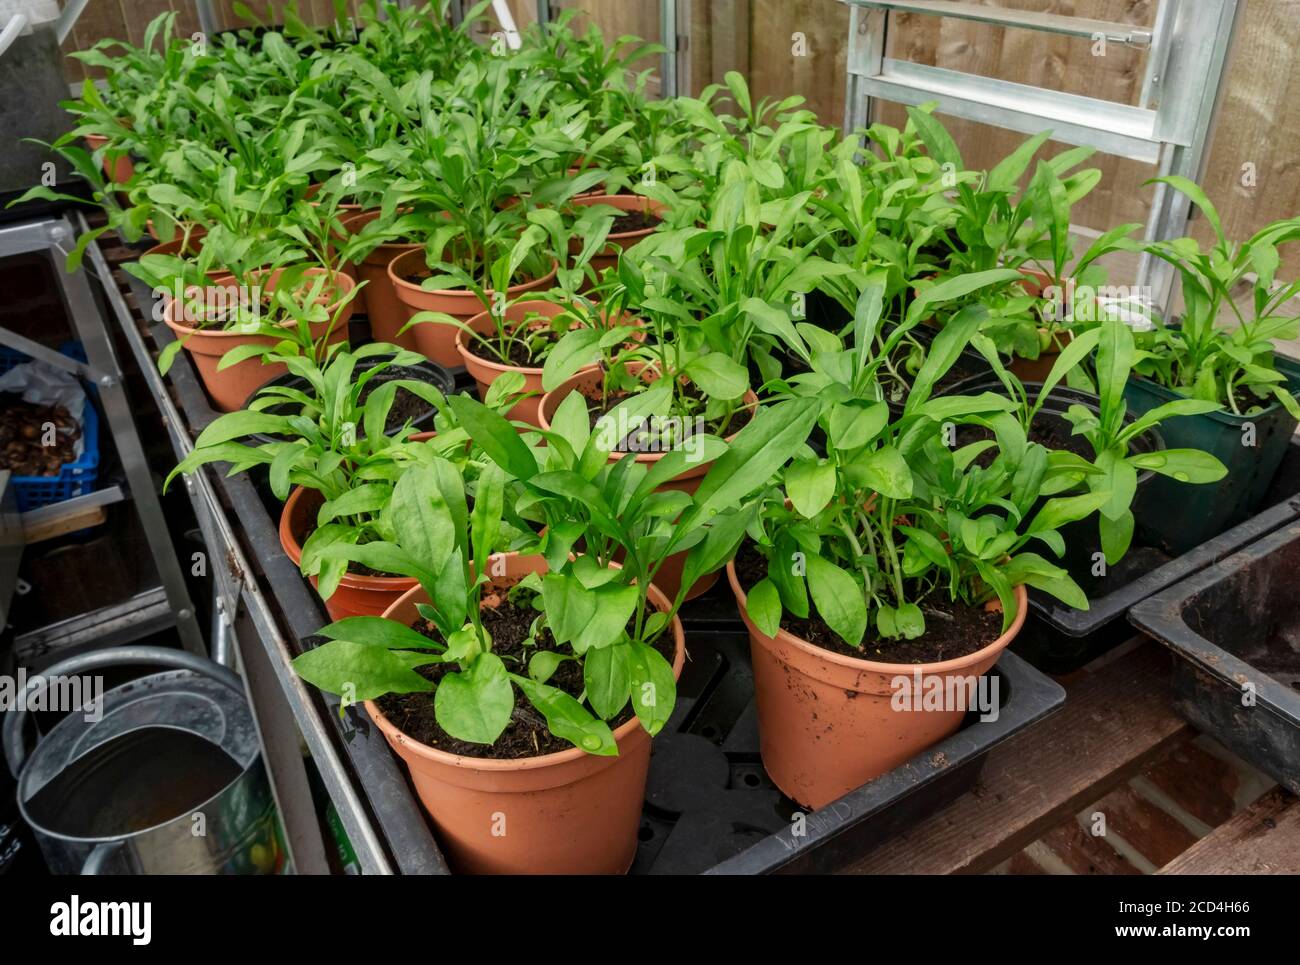 Close up of pots of young wallflower wallflowers bedding plants growing in the greenhouse England UK United Kingdom GB Great Britain Stock Photo